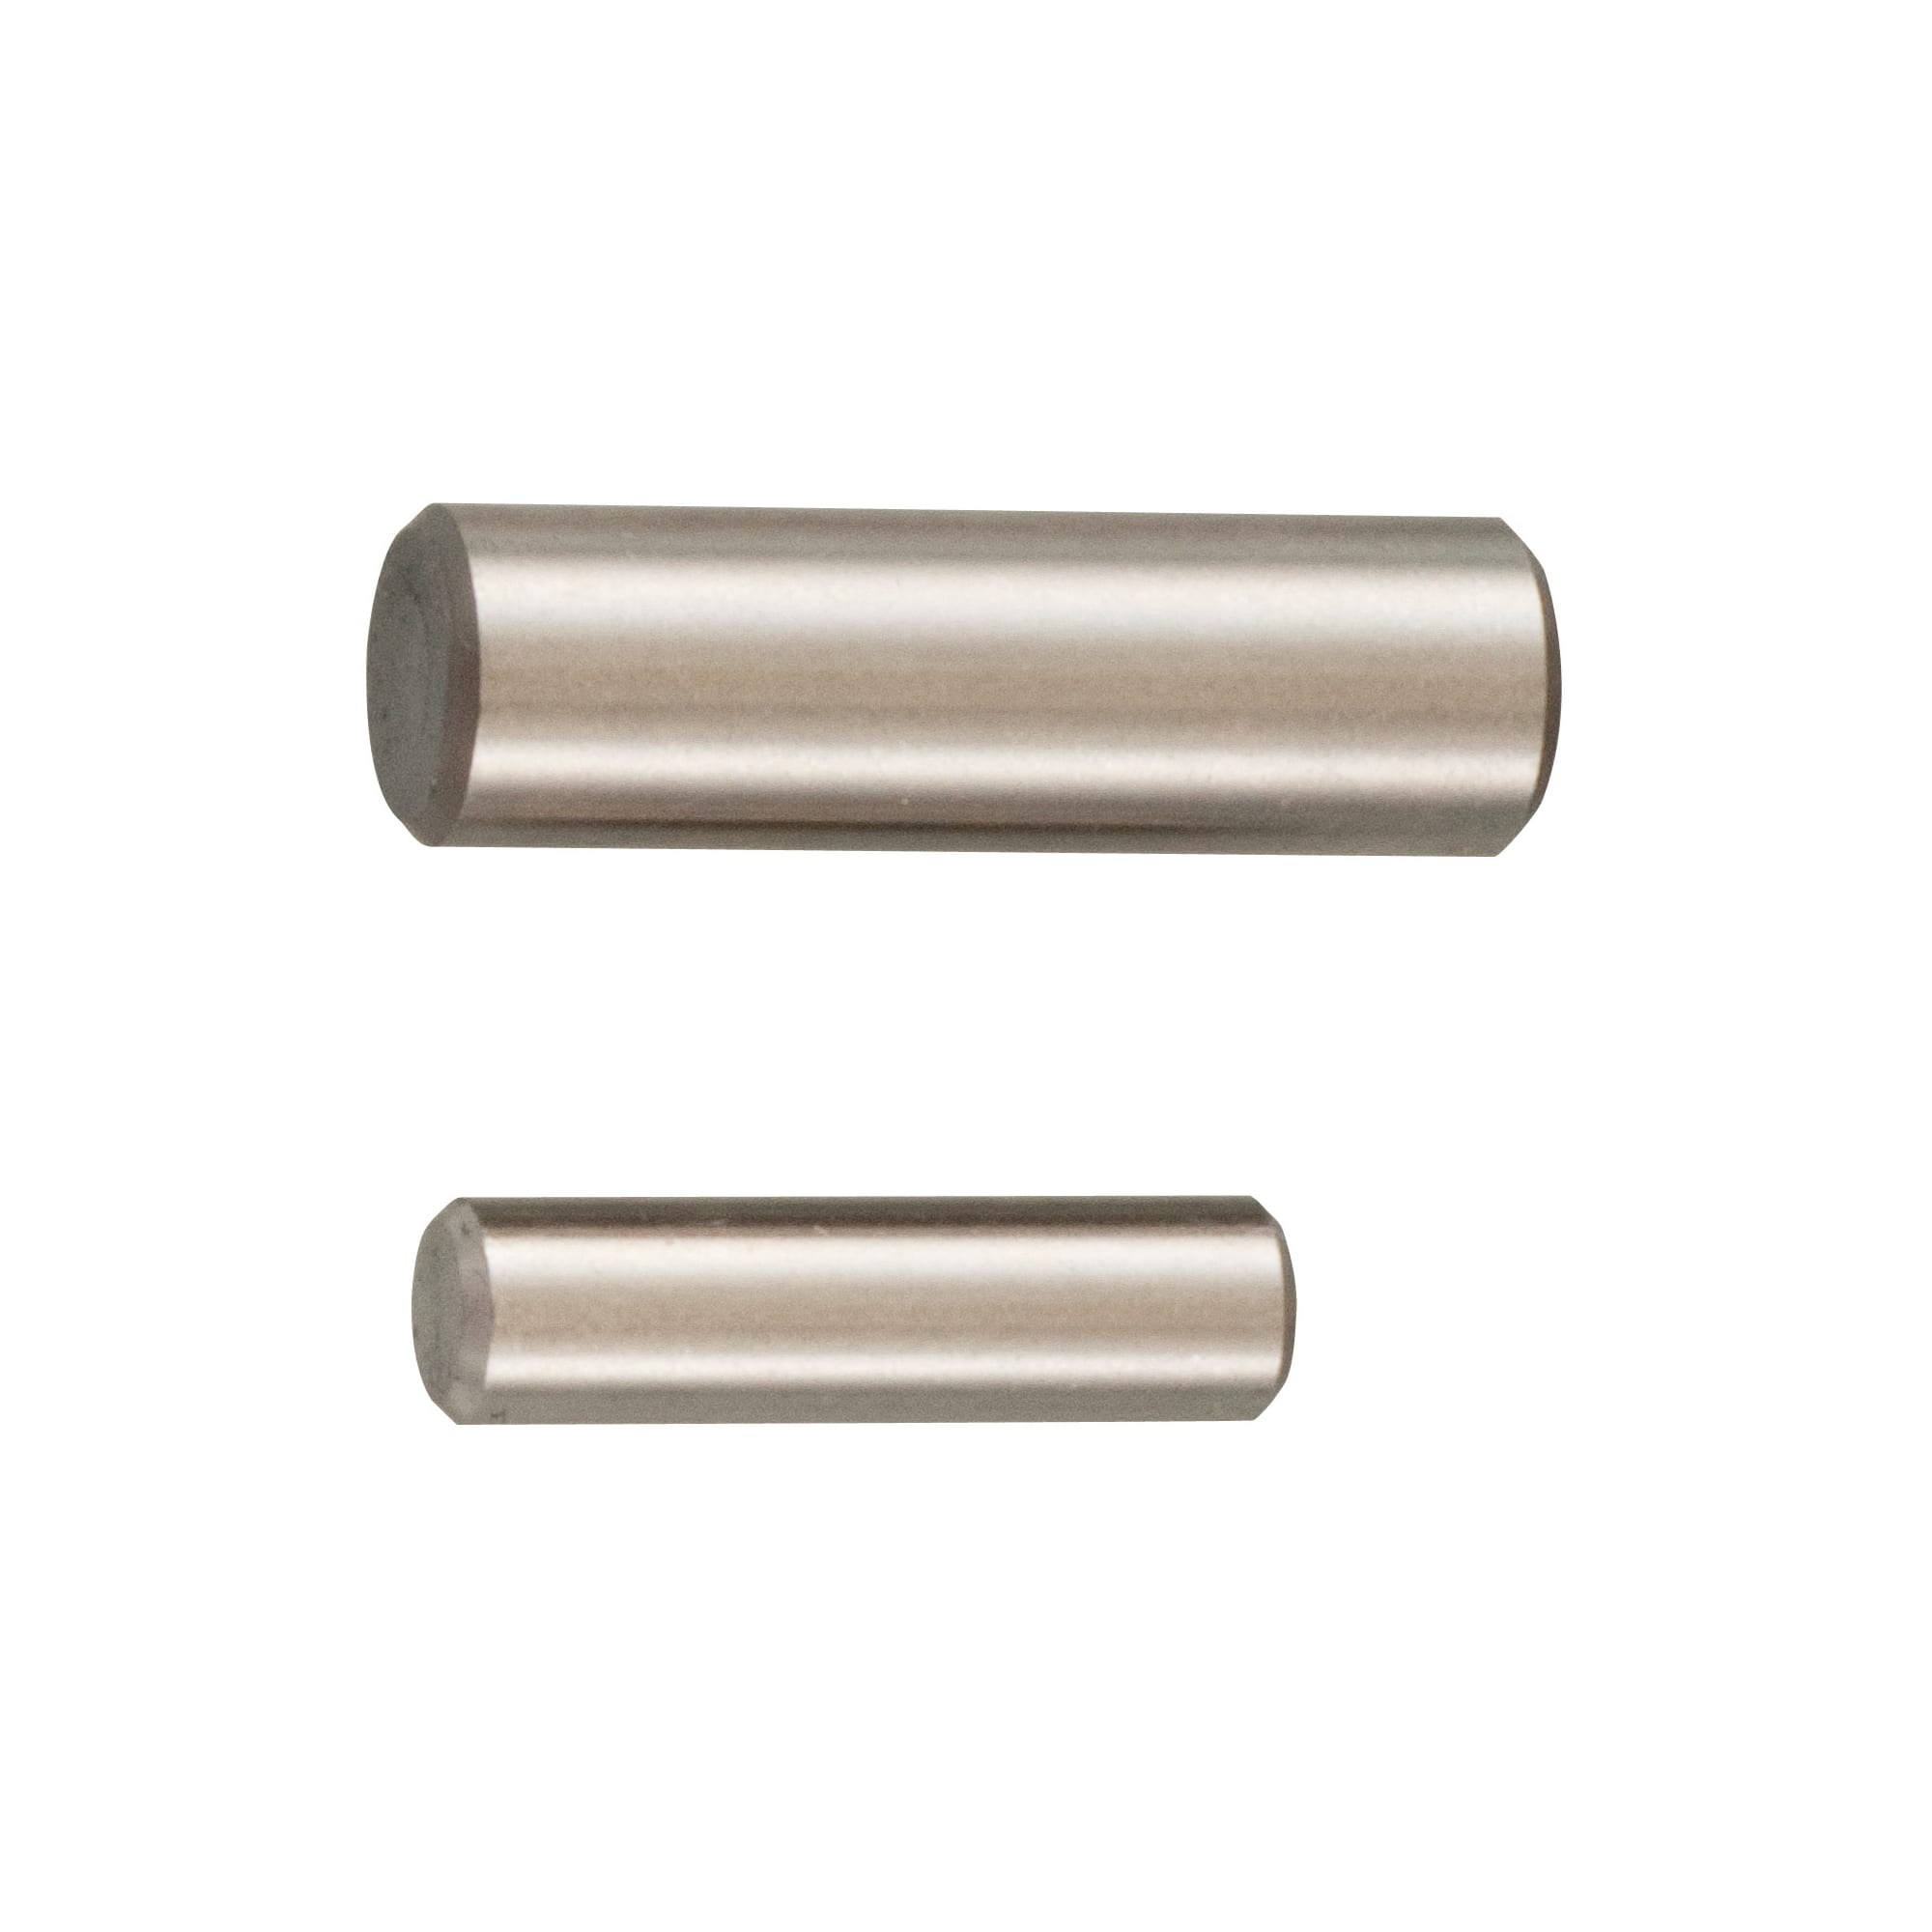 Dowel Pins - Straight, Both Ends Chamfered, h7 Tolerance, MISUMI